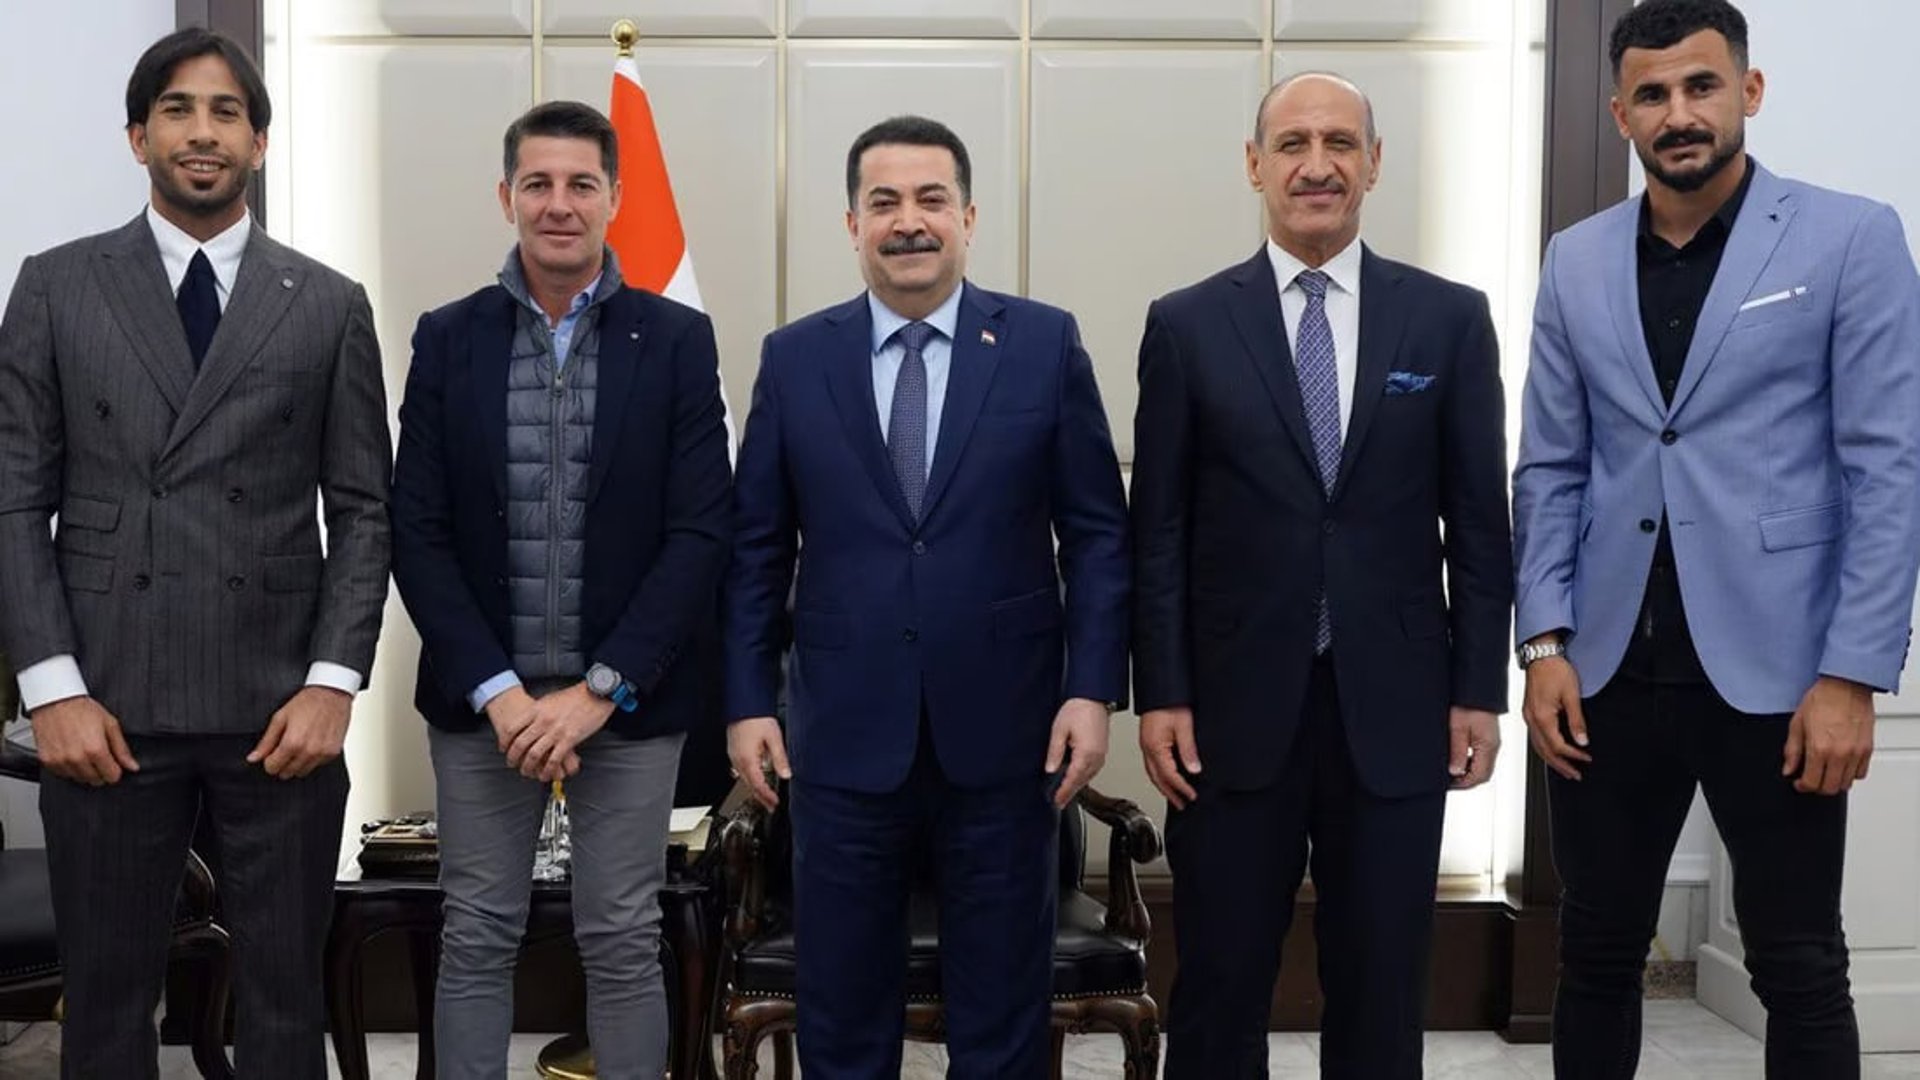 AlSudani affirms ongoing support for Iraqi national team during visit